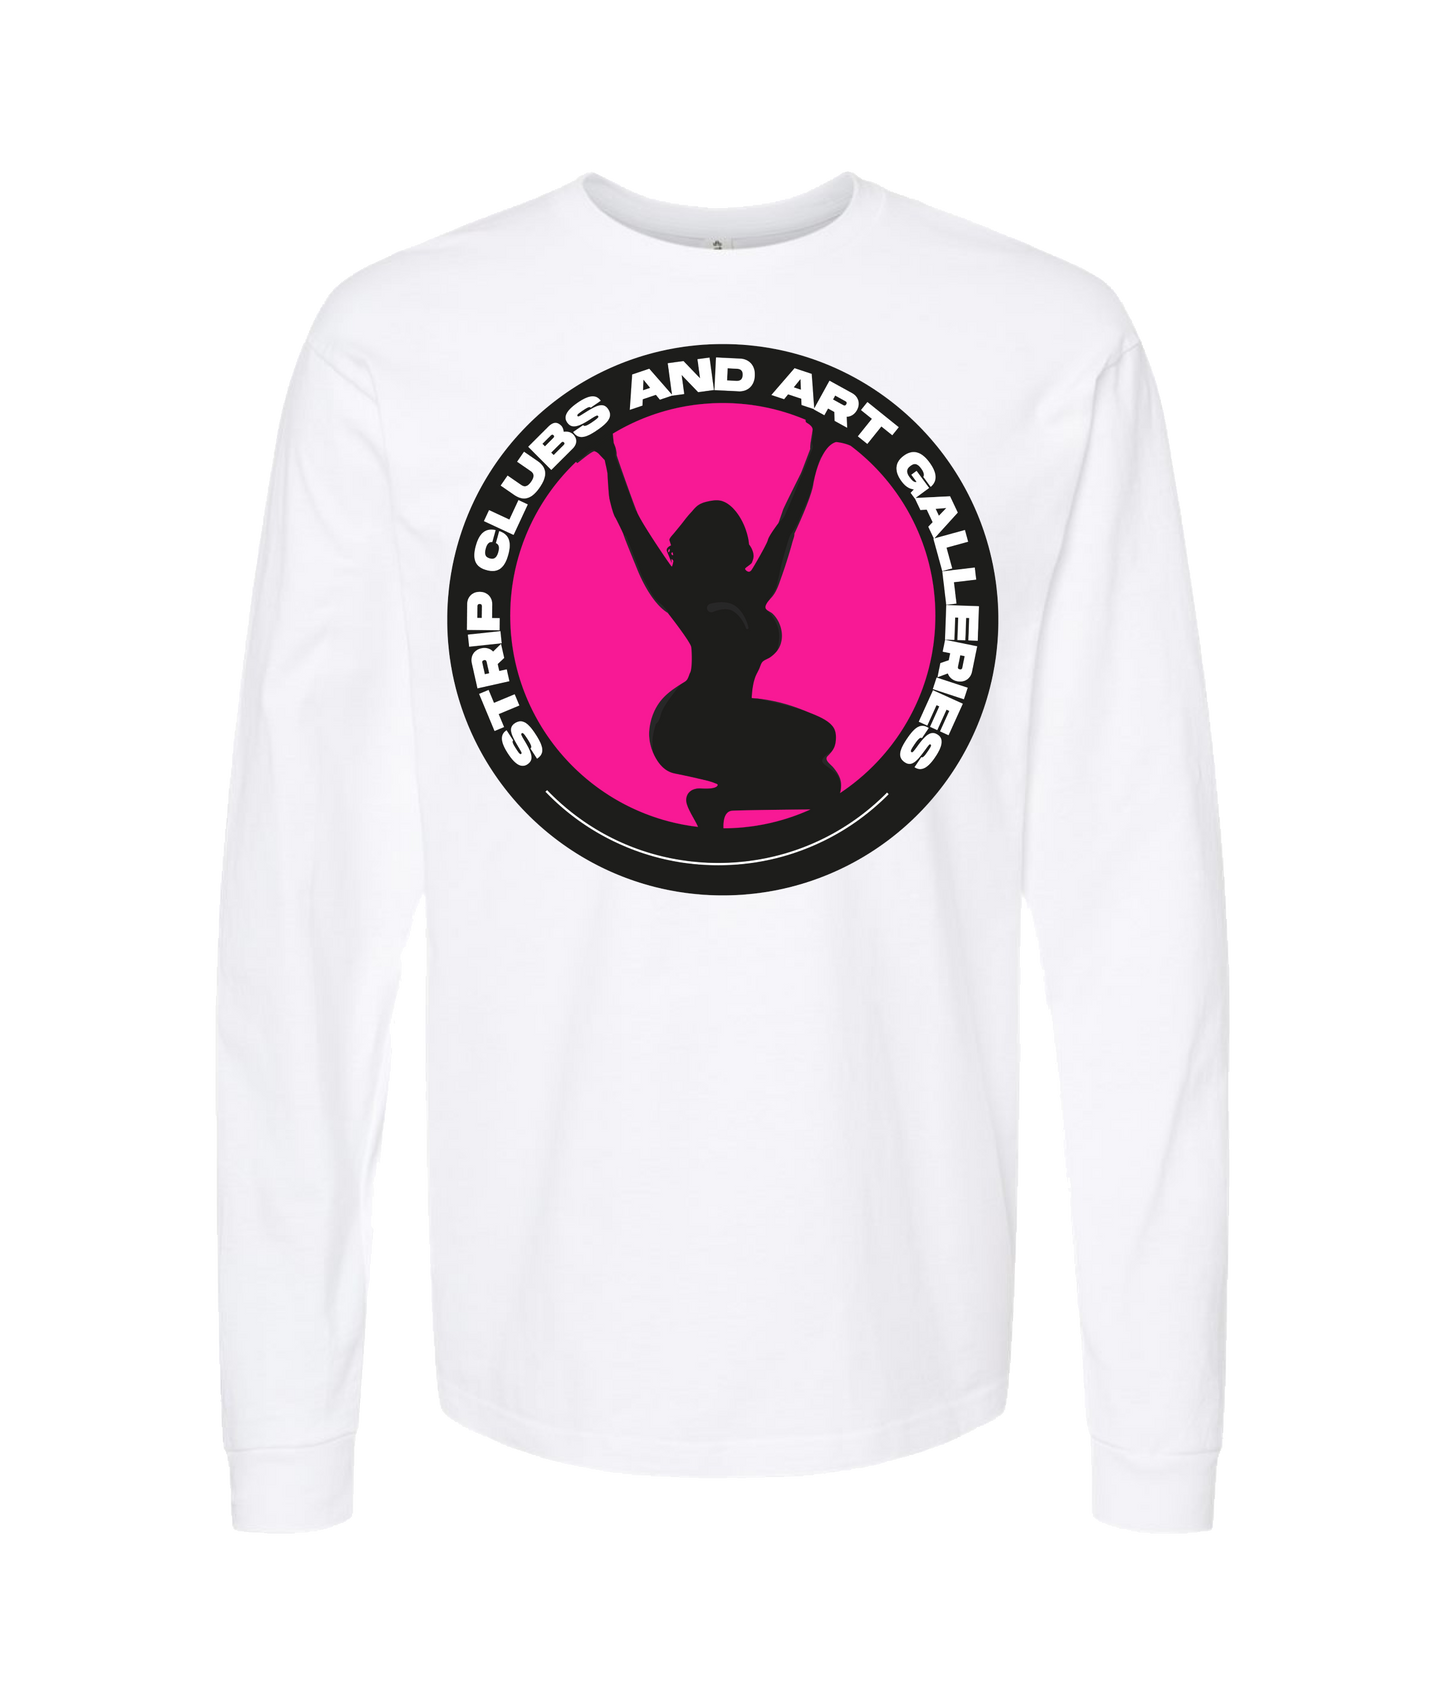 StripClubs and Art Galleries - Patch Tee - White Long Sleeve T